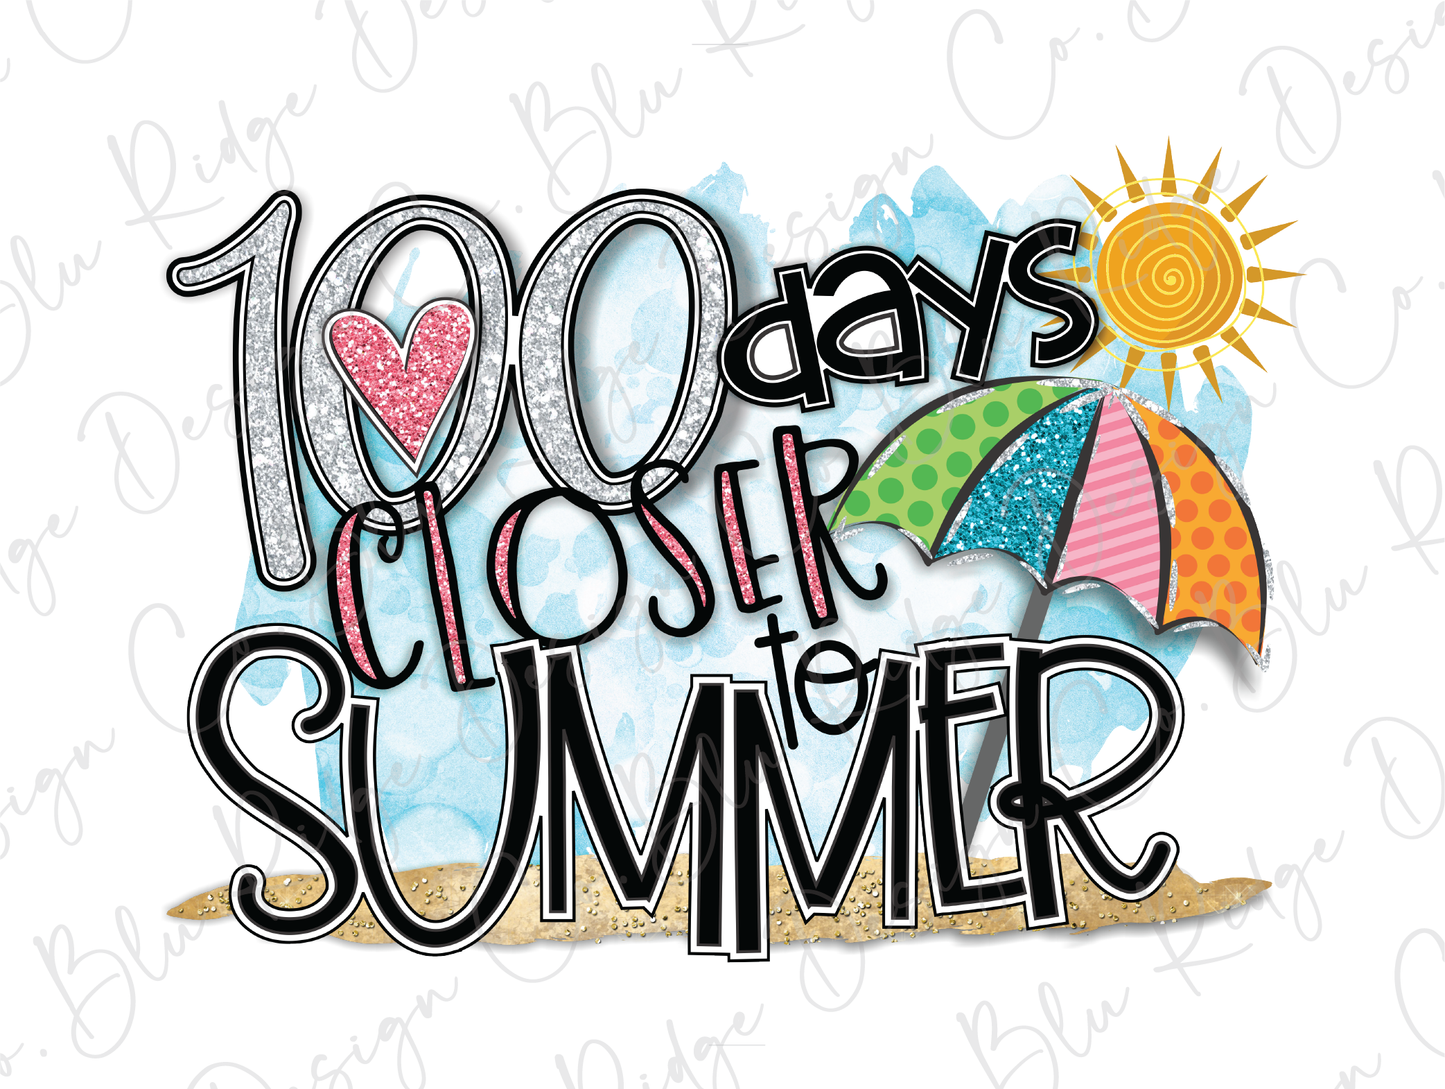 100 Days Closer to Summer 100 Days of School Direct To Film (DTF) Transfer